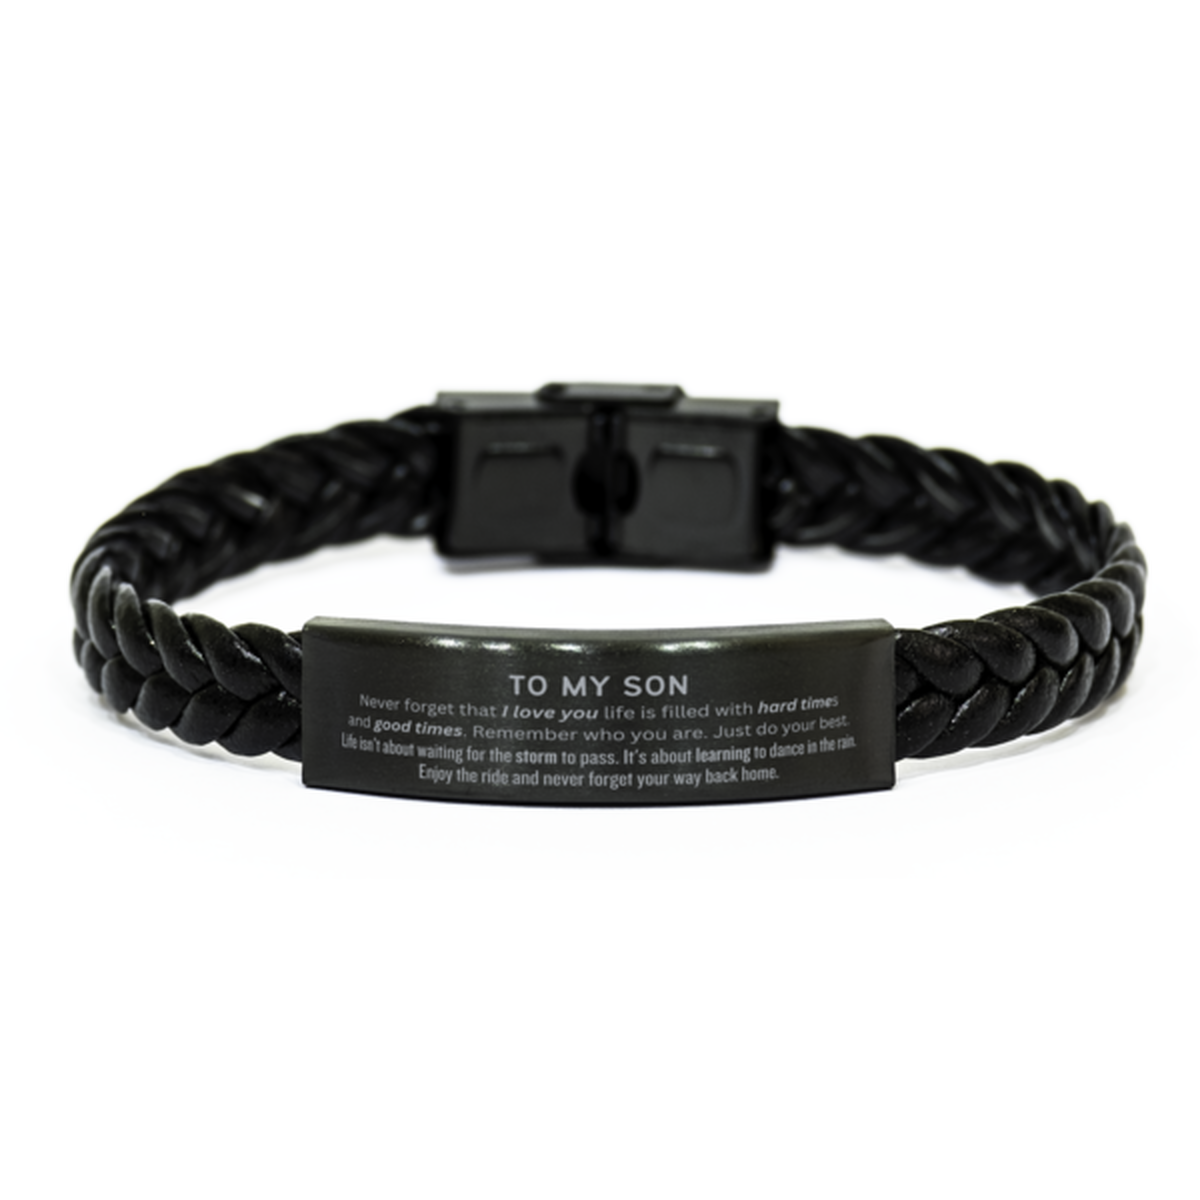 Christmas Son Braided Leather Bracelet Gifts, To My Son Birthday Thank You Gifts For Son, Graduation Unique Gifts For Son To My Son Never forget that I love you life is filled with hard times and good times. Remember who you are. Just do your best